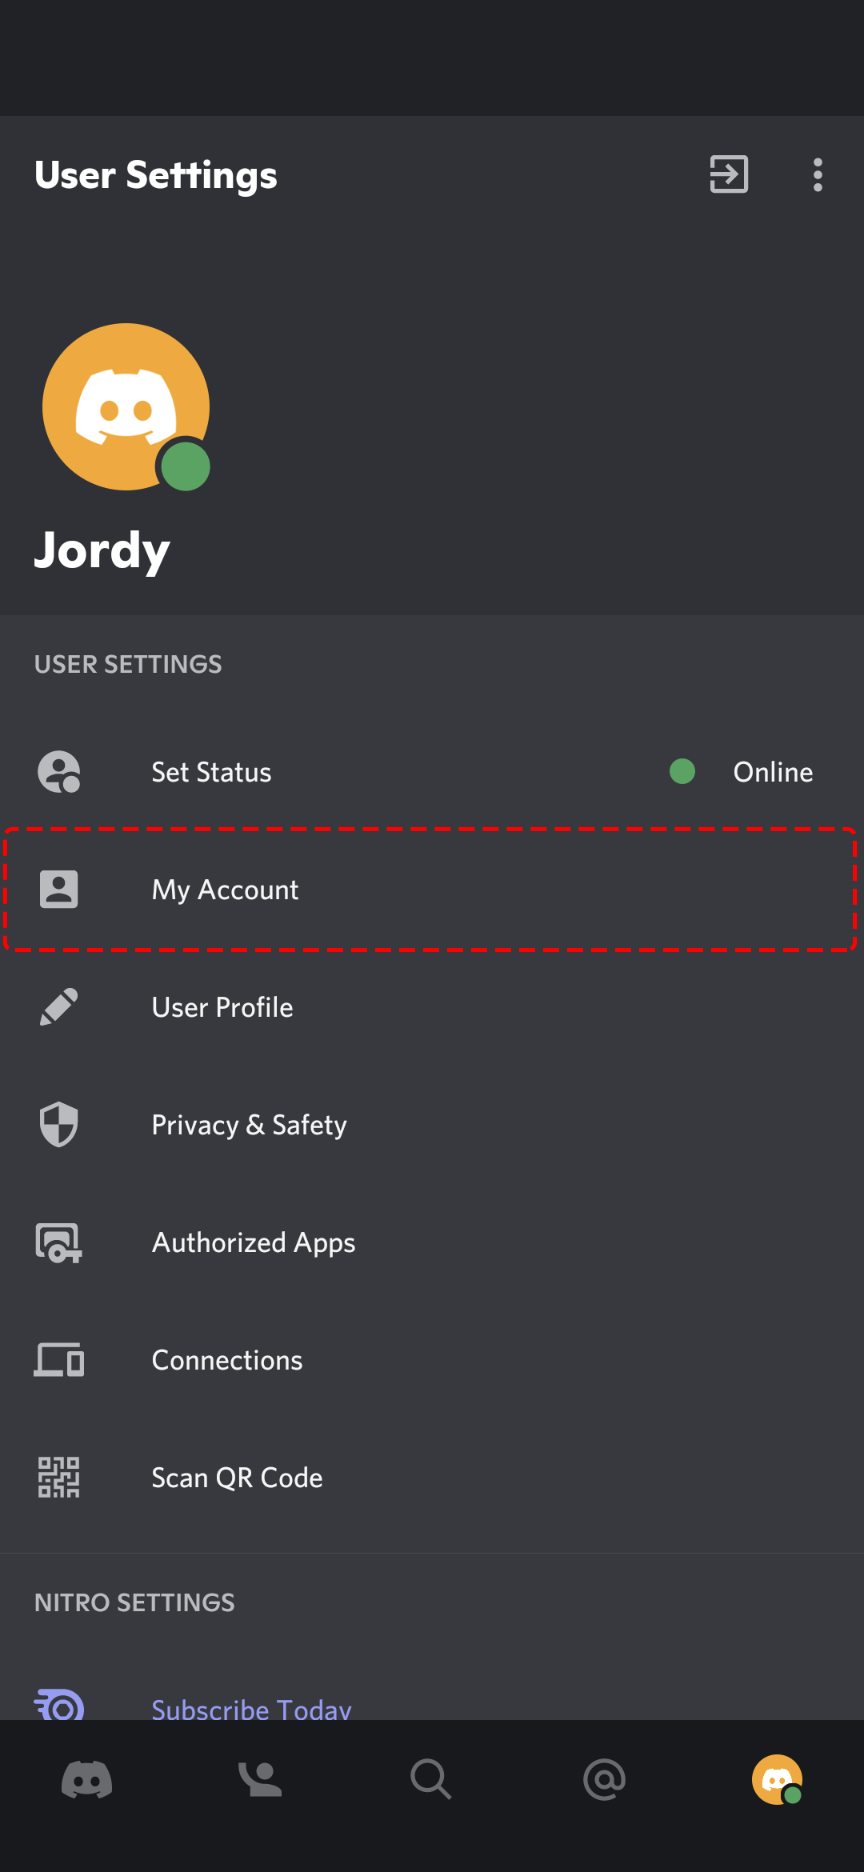 android-my-account-option-user-settings-how-to-change-email.png